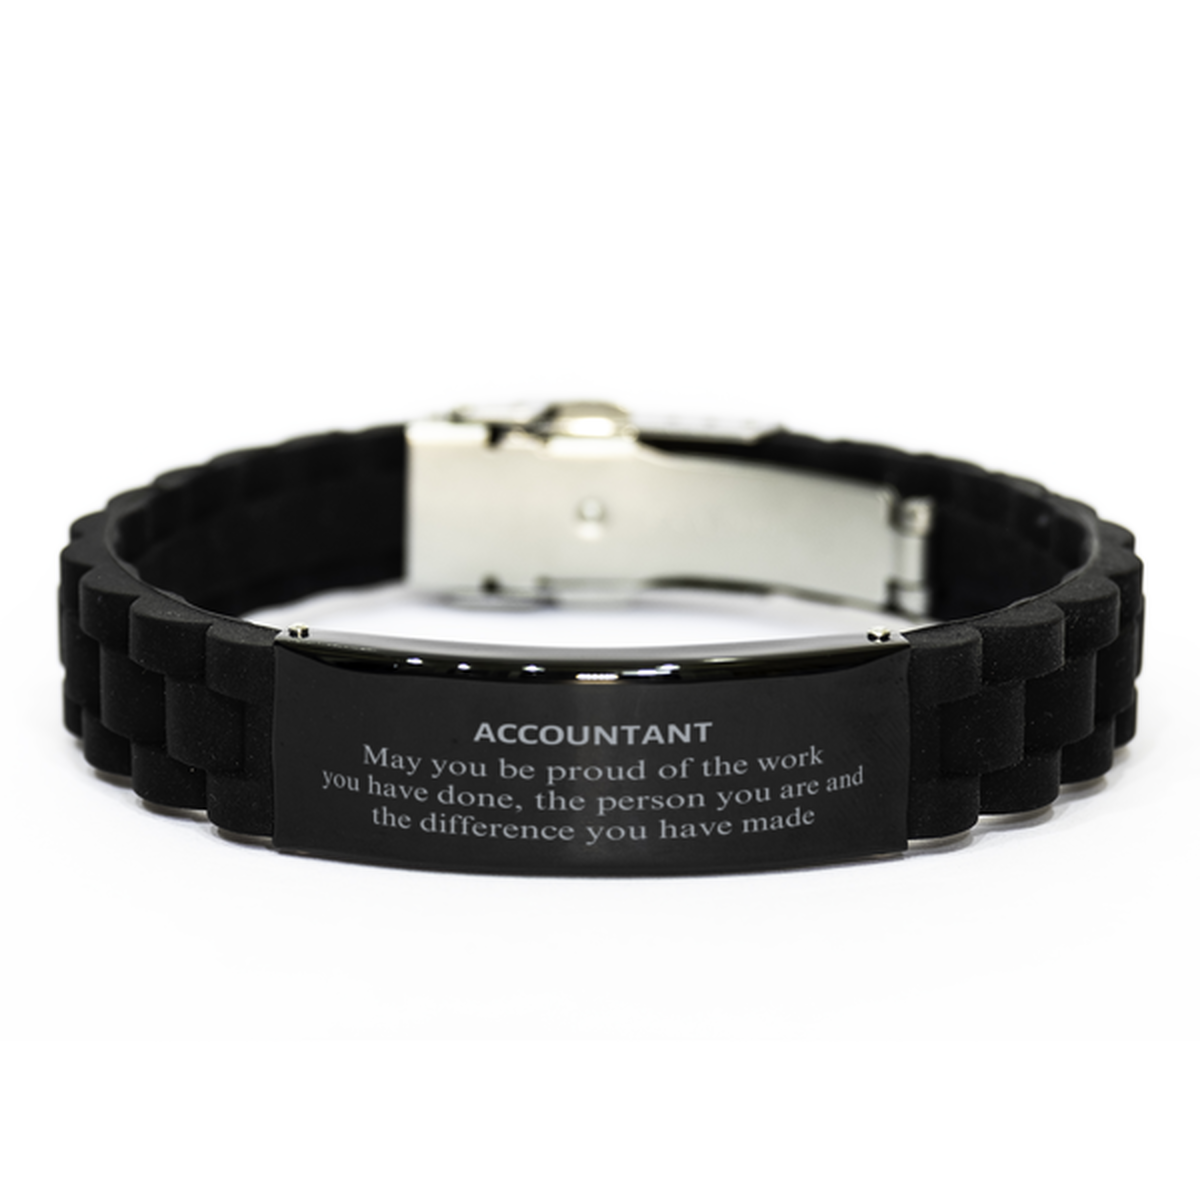 Accountant May you be proud of the work you have done, Retirement Accountant Black Glidelock Clasp Bracelet for Colleague Appreciation Gifts Amazing for Accountant